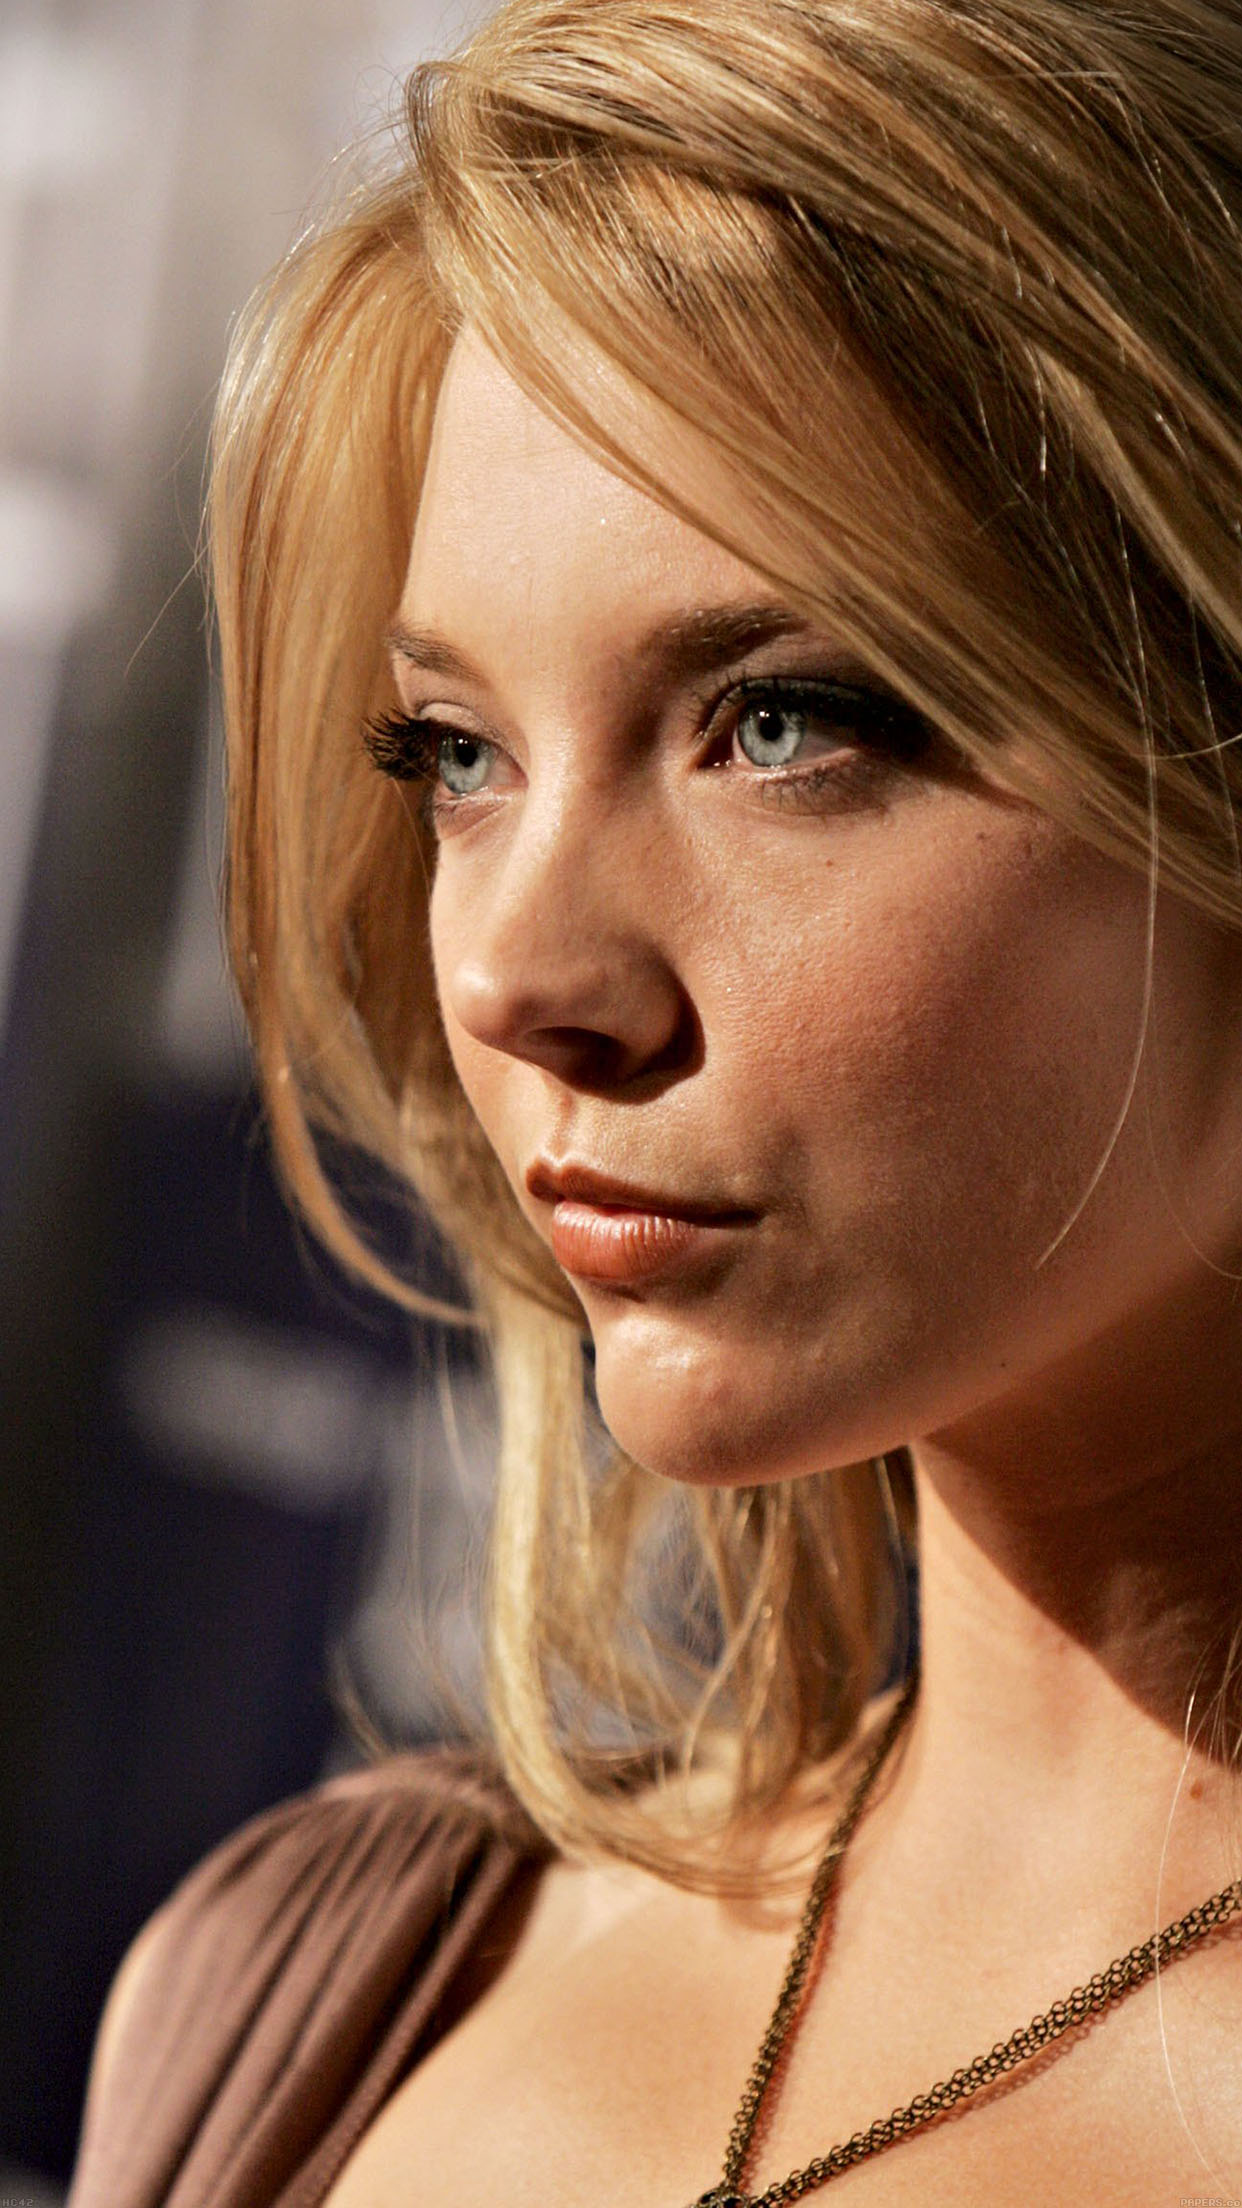 Natalie Dormer Film English Actress Celebrity Android wallpaper